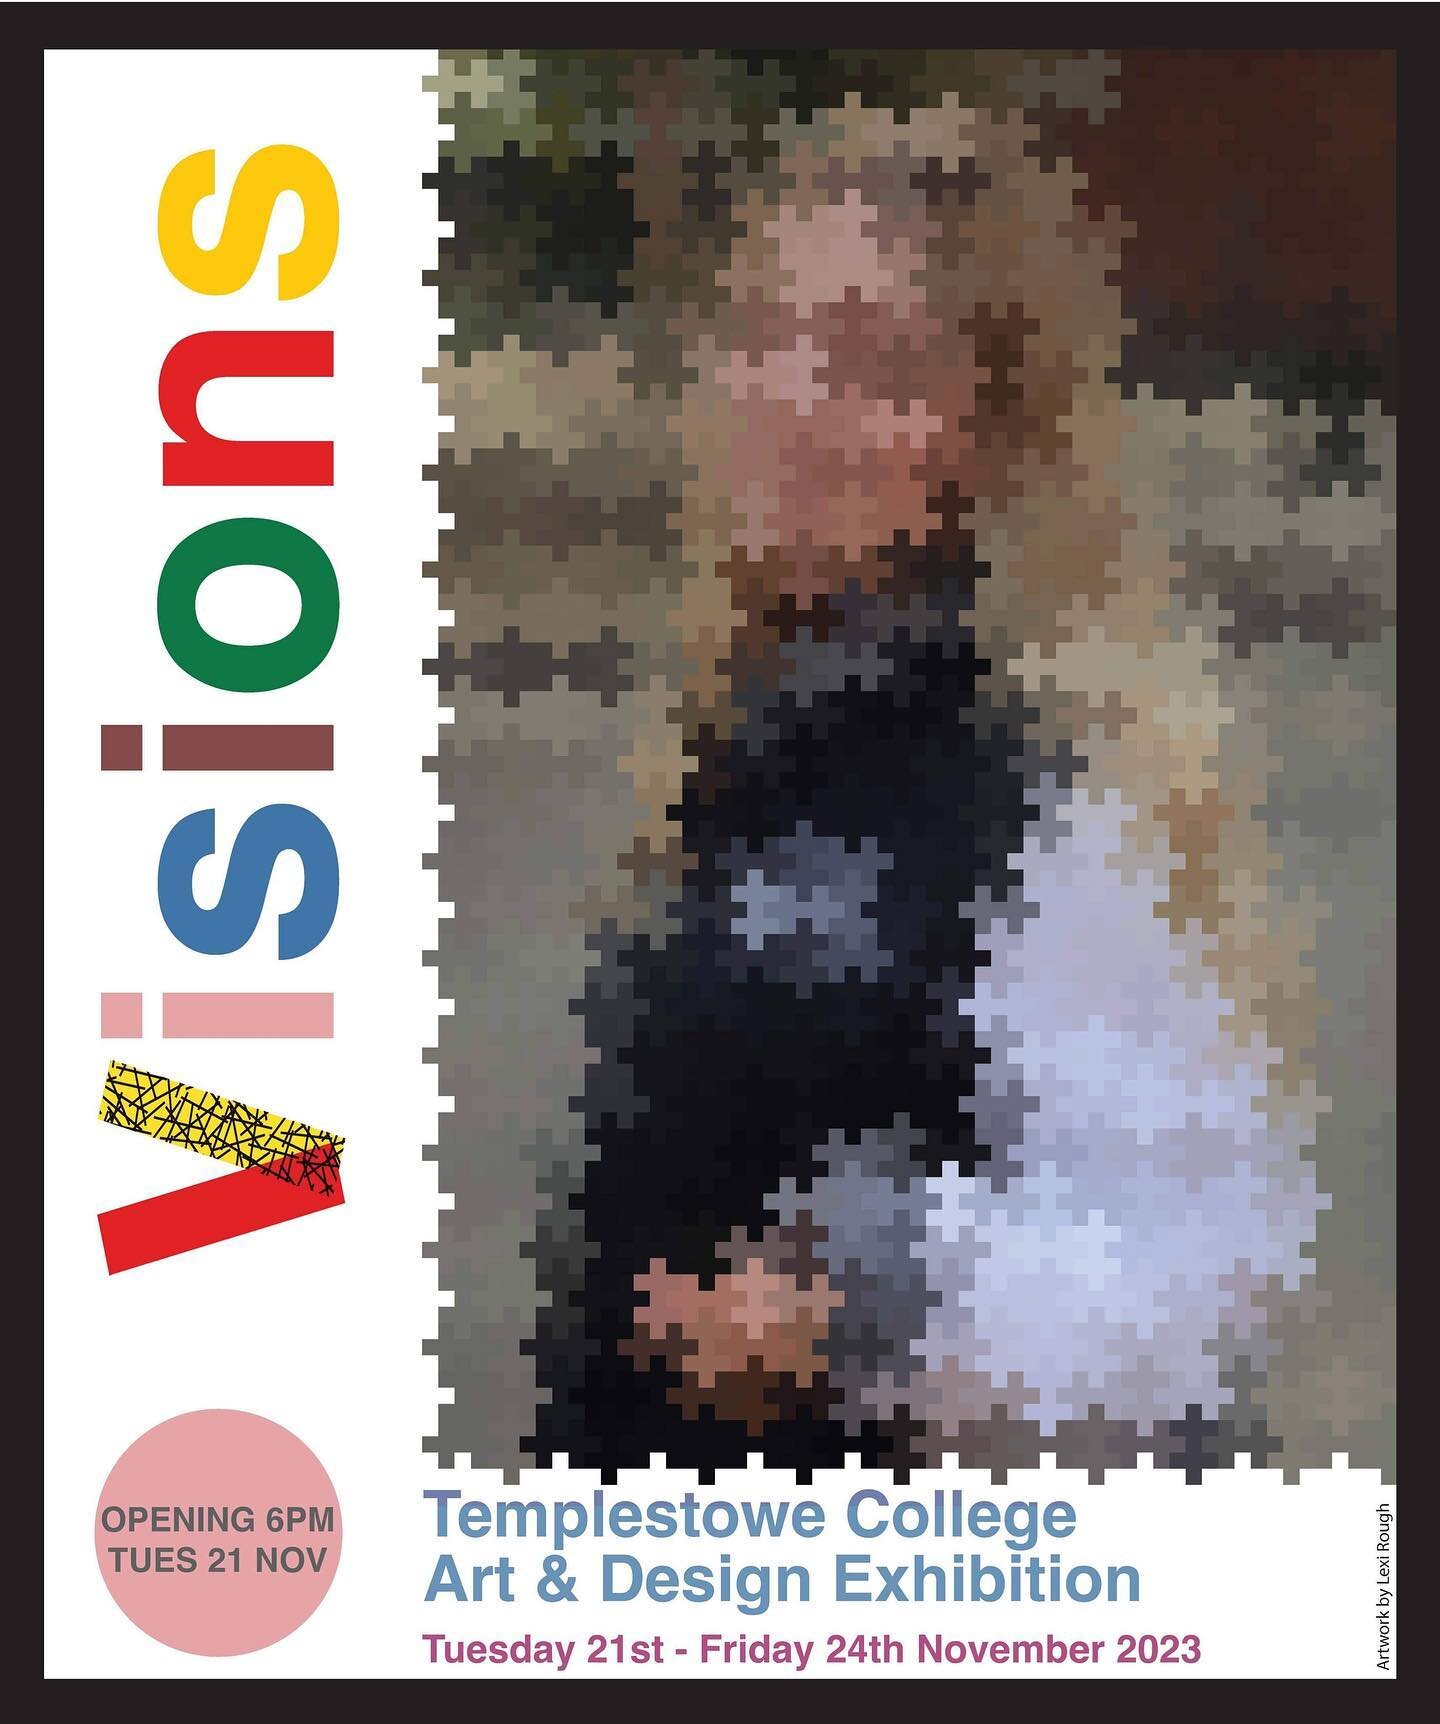 Templestowe College Annual Art &amp; Design Show 2023! The art and design event of the season. This will be another amazing night showcasing all of our students and their amazing efforts across all art and design subject at TC. 

21st November 2023 @